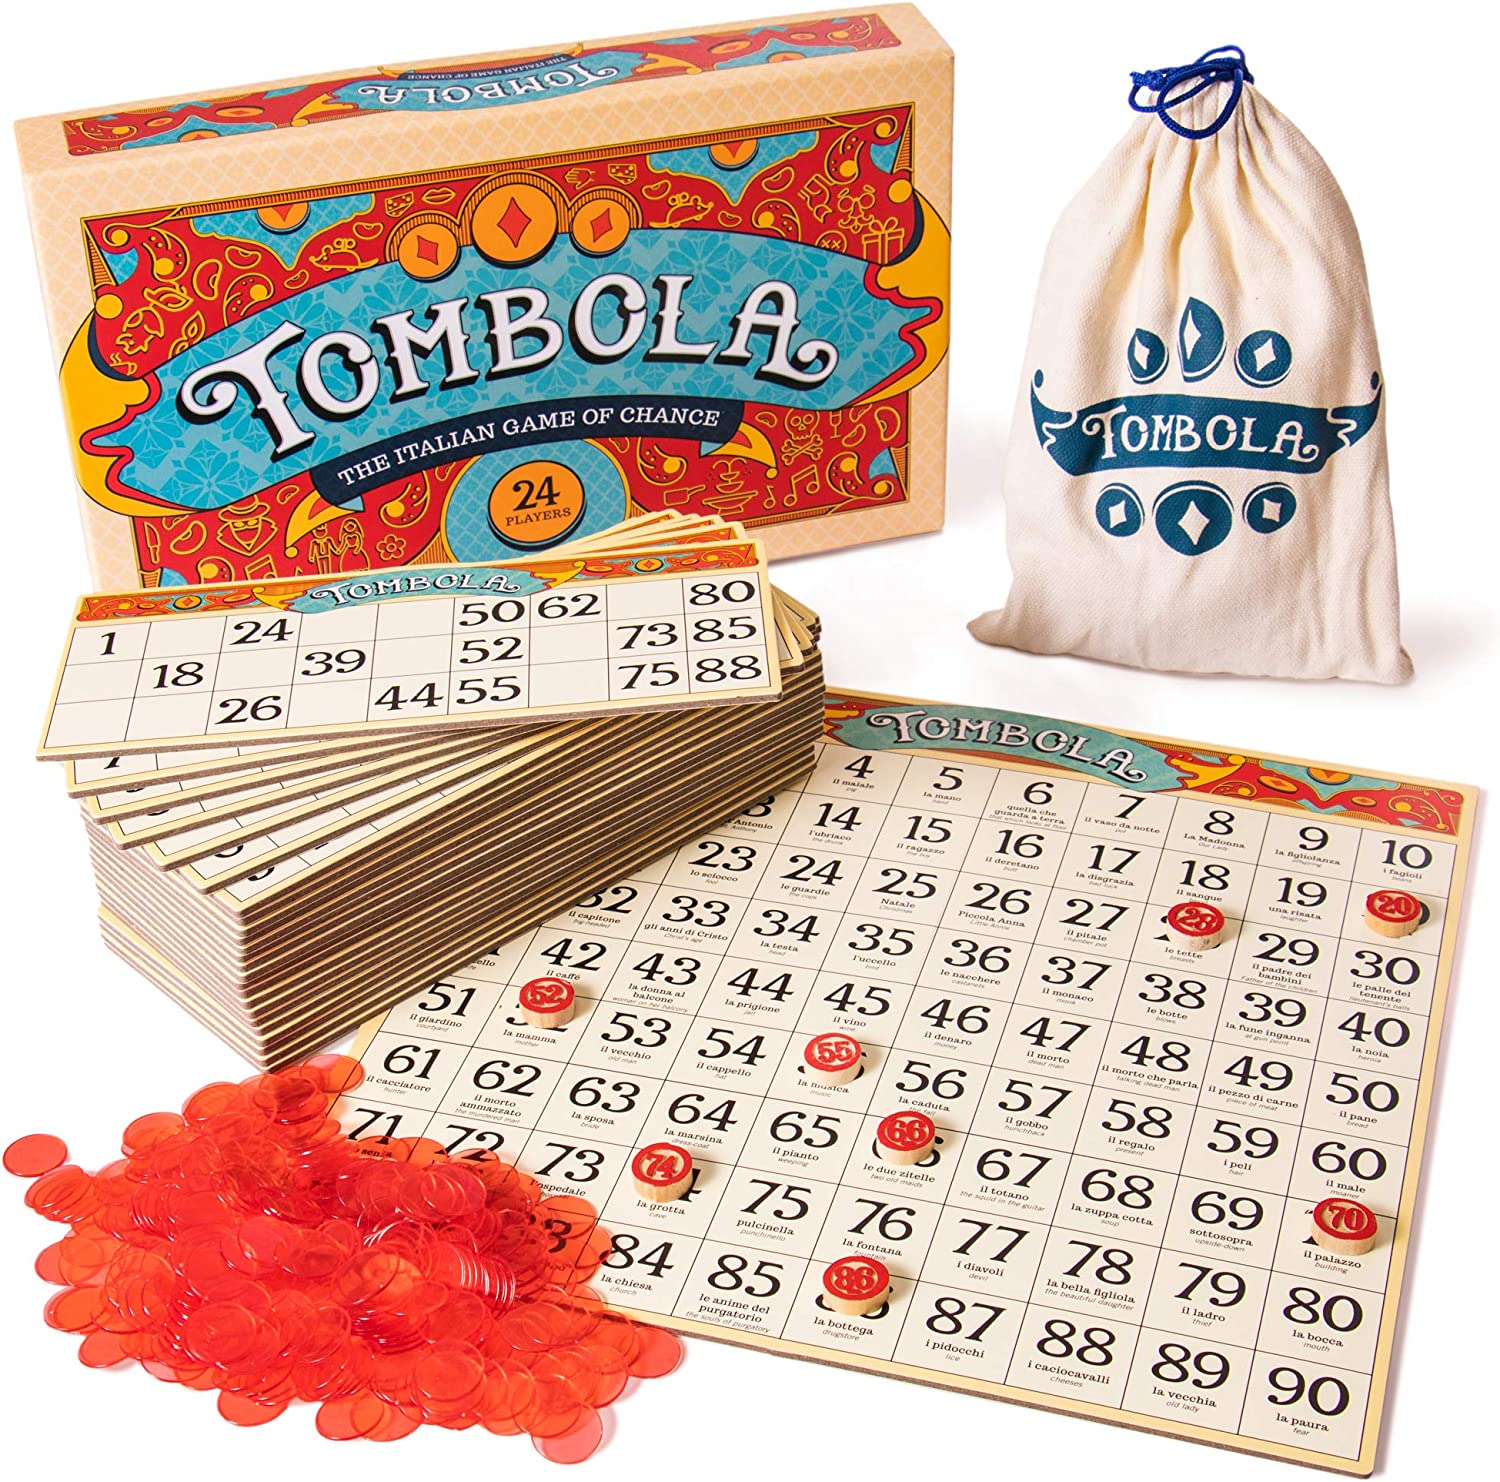 Tombola Bingo Board Game The Italian Game of Chance for Family, Friends  and Large Parties Up to 24 Players! Includes Calling Board, 90 Tombolini  Tiles, 24 Double-Sided Cards and 360 Chips